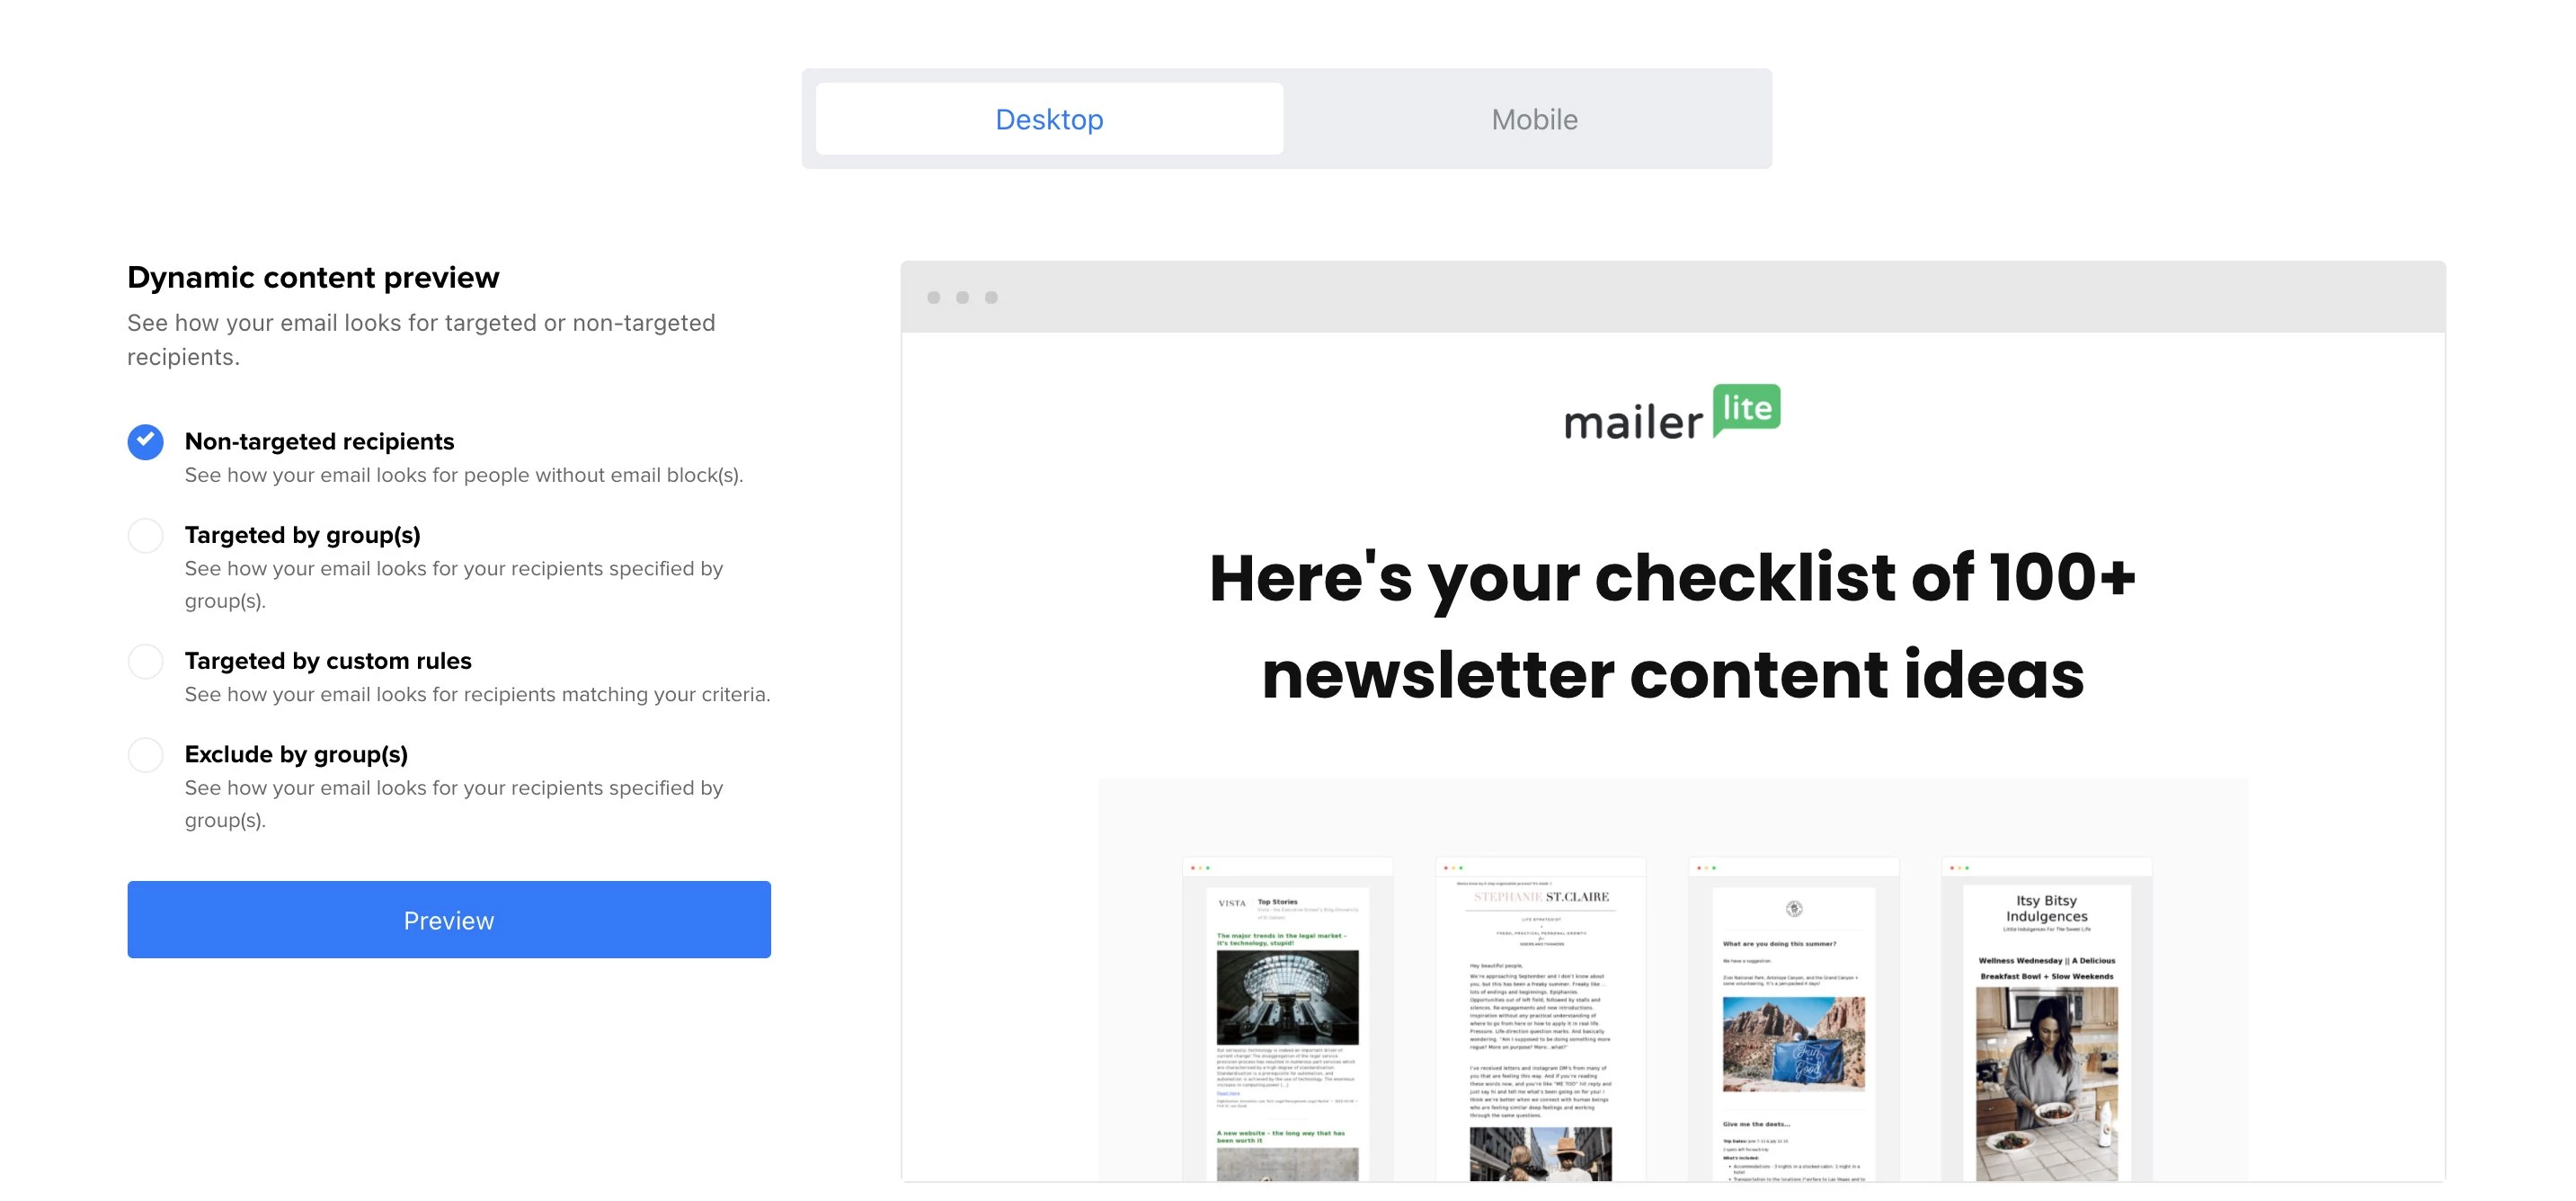 Preview dynamic content - MailerLite